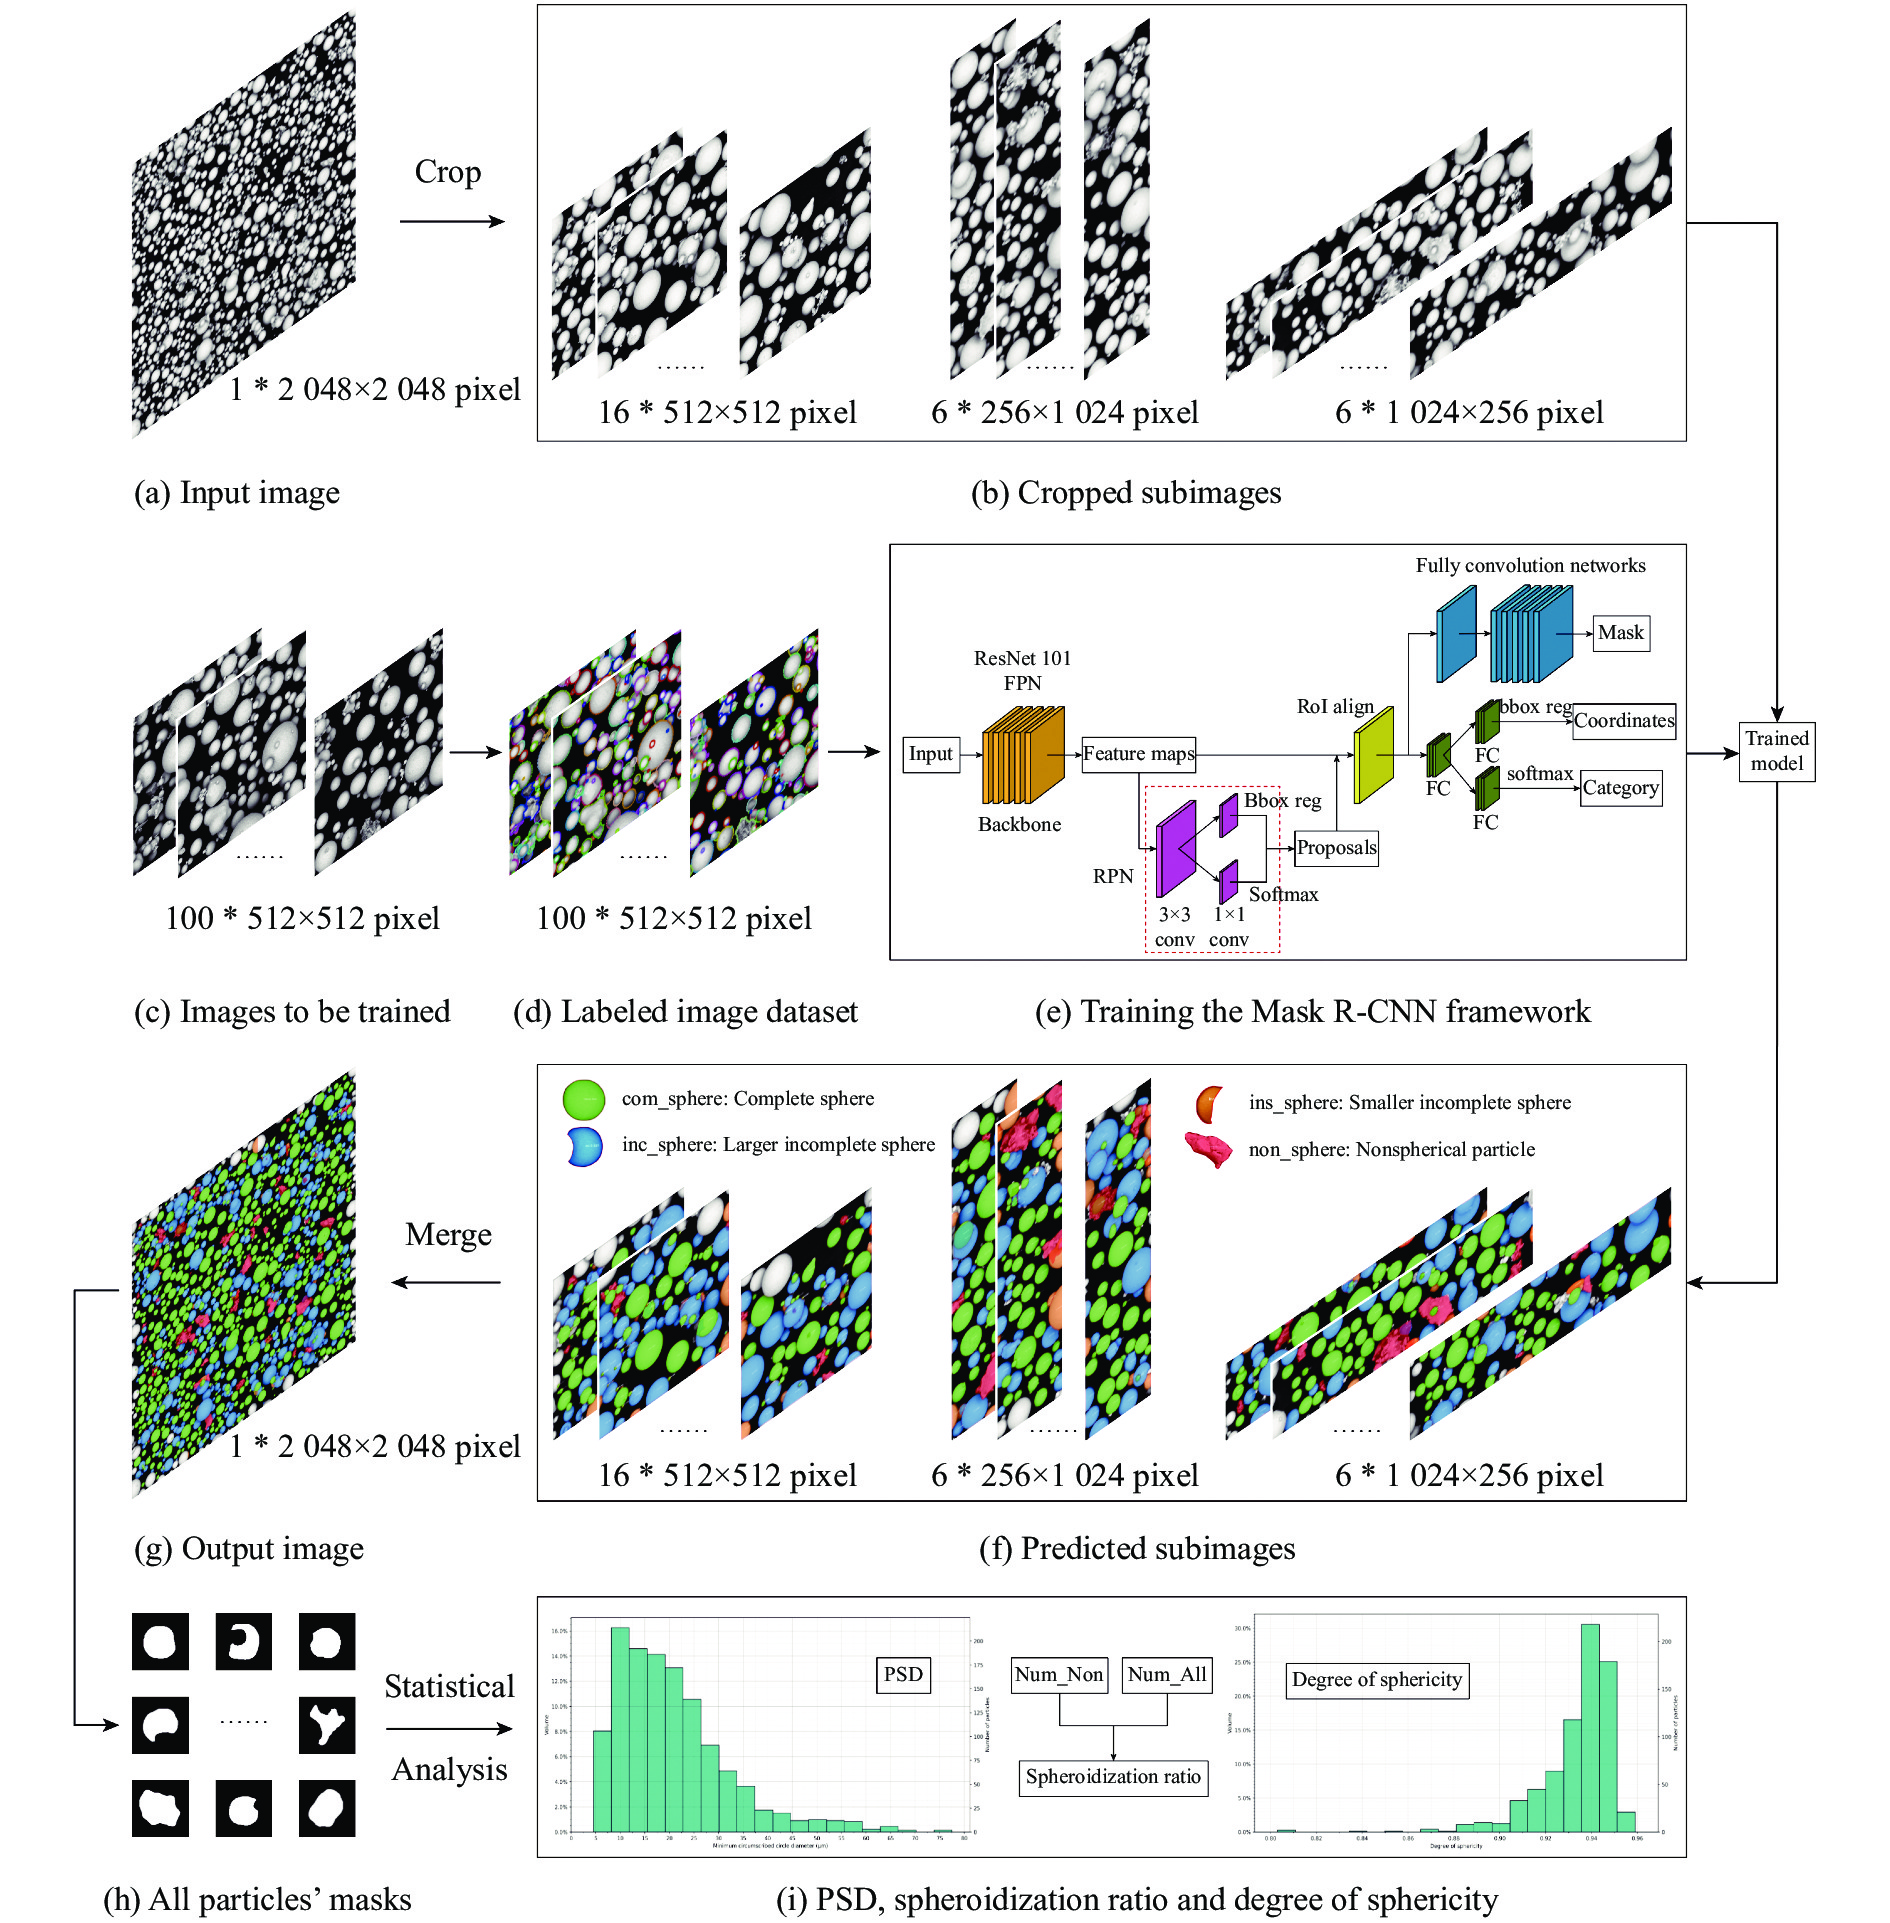 Flowchart of the powder microscopy image automatic analysis system